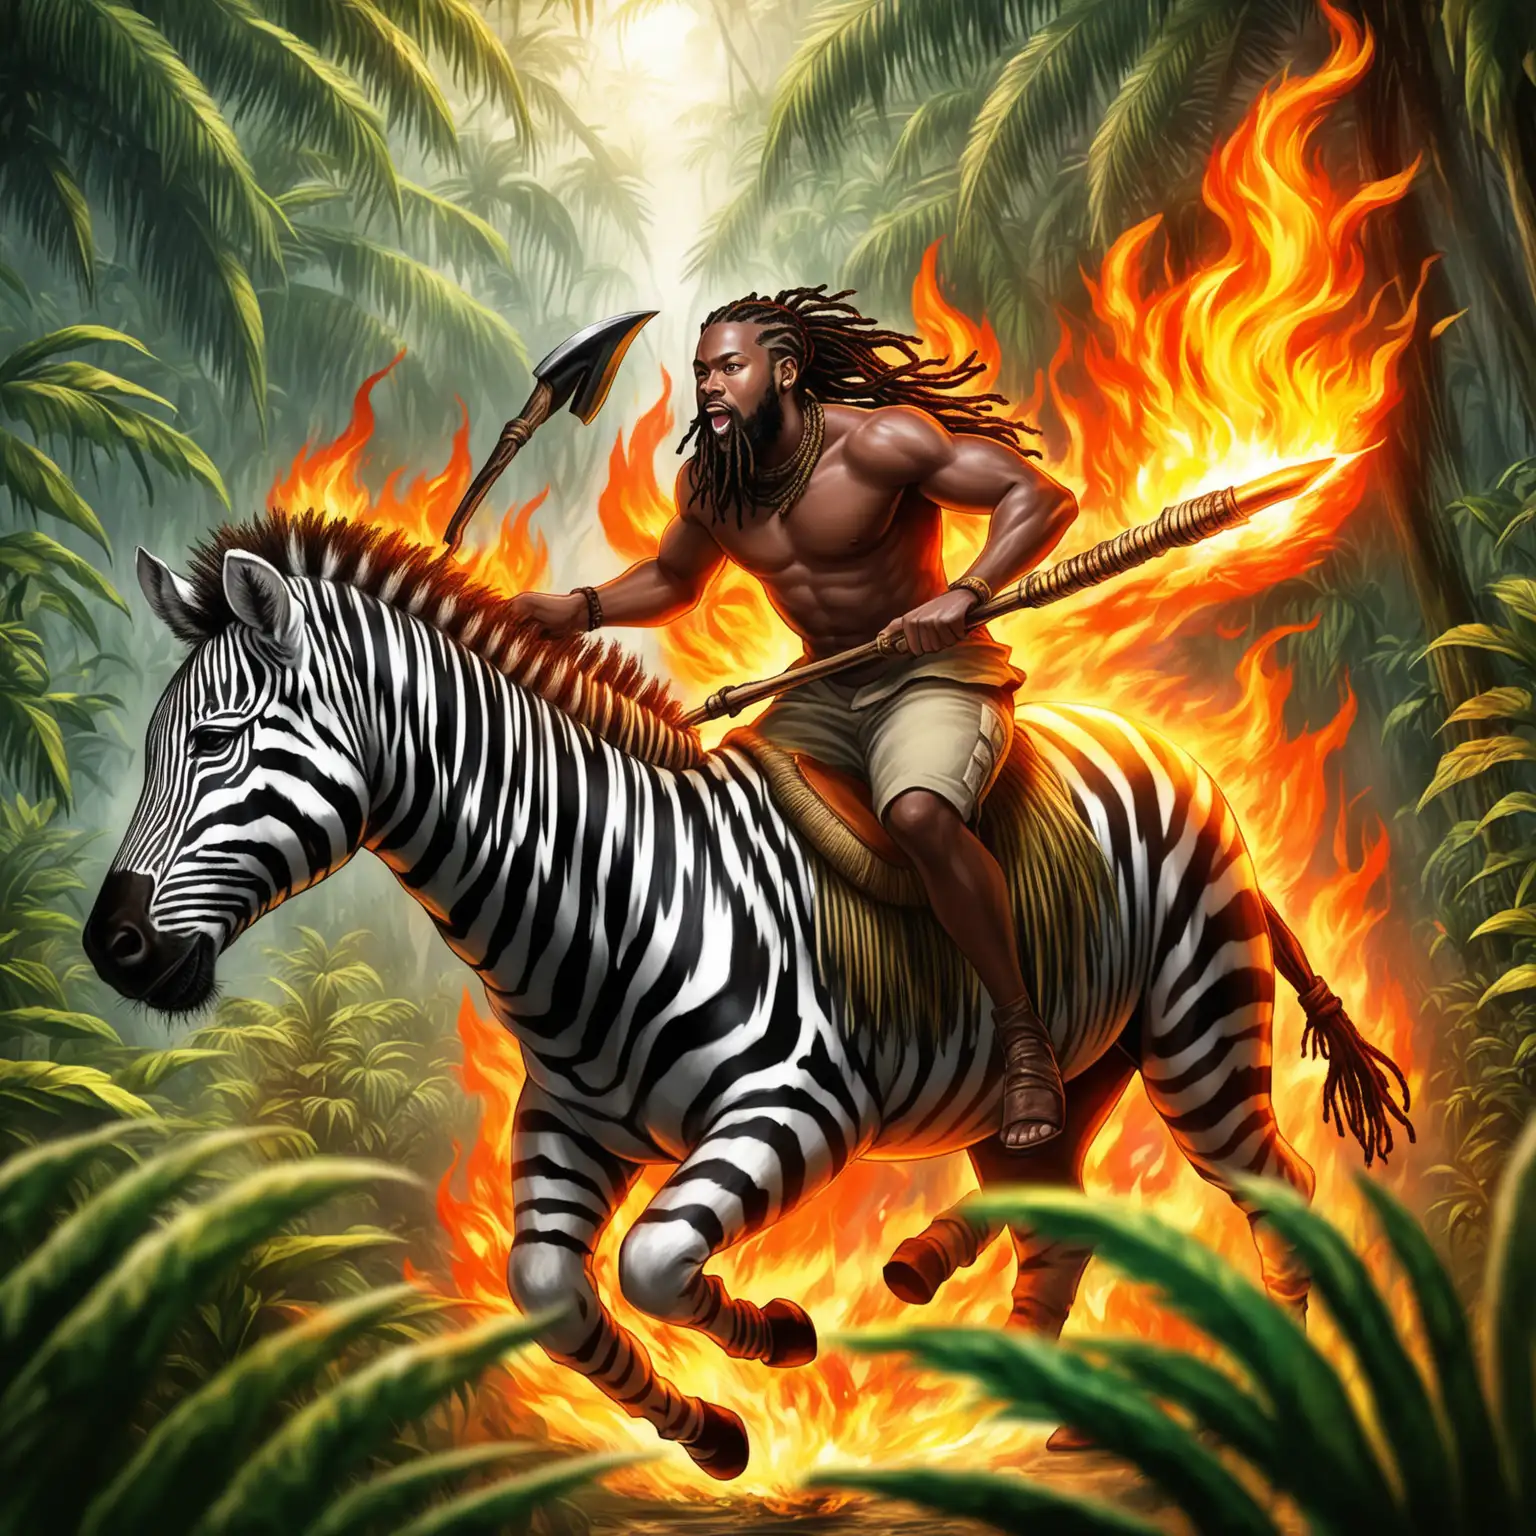 African American Man Riding Zebra with Fiery Determination in Jungle Adventure